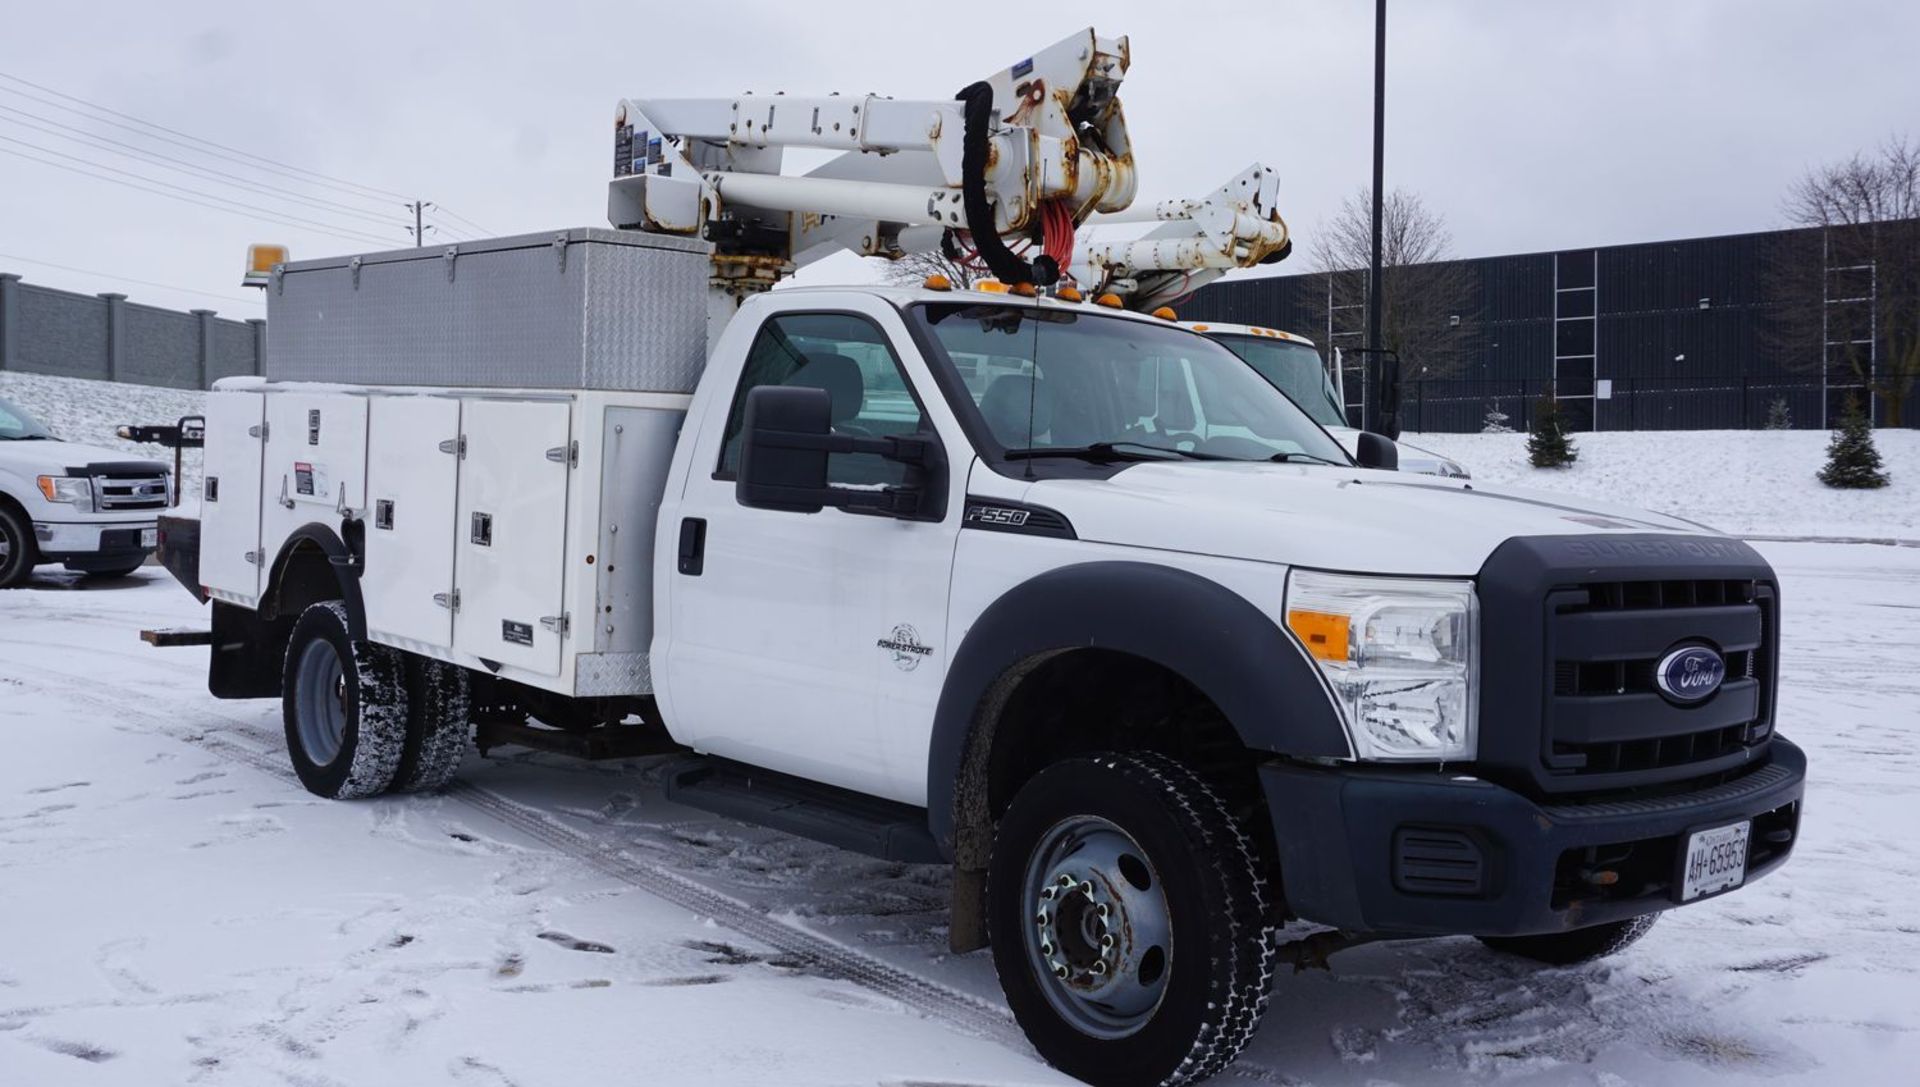 2014 ALTEC AT37G ARTICULATING TELESCOPIC BOOM & BUCKET MOUNTED ON 2014 FORD F550XL SUPER DUTY 4X4 - Image 4 of 21